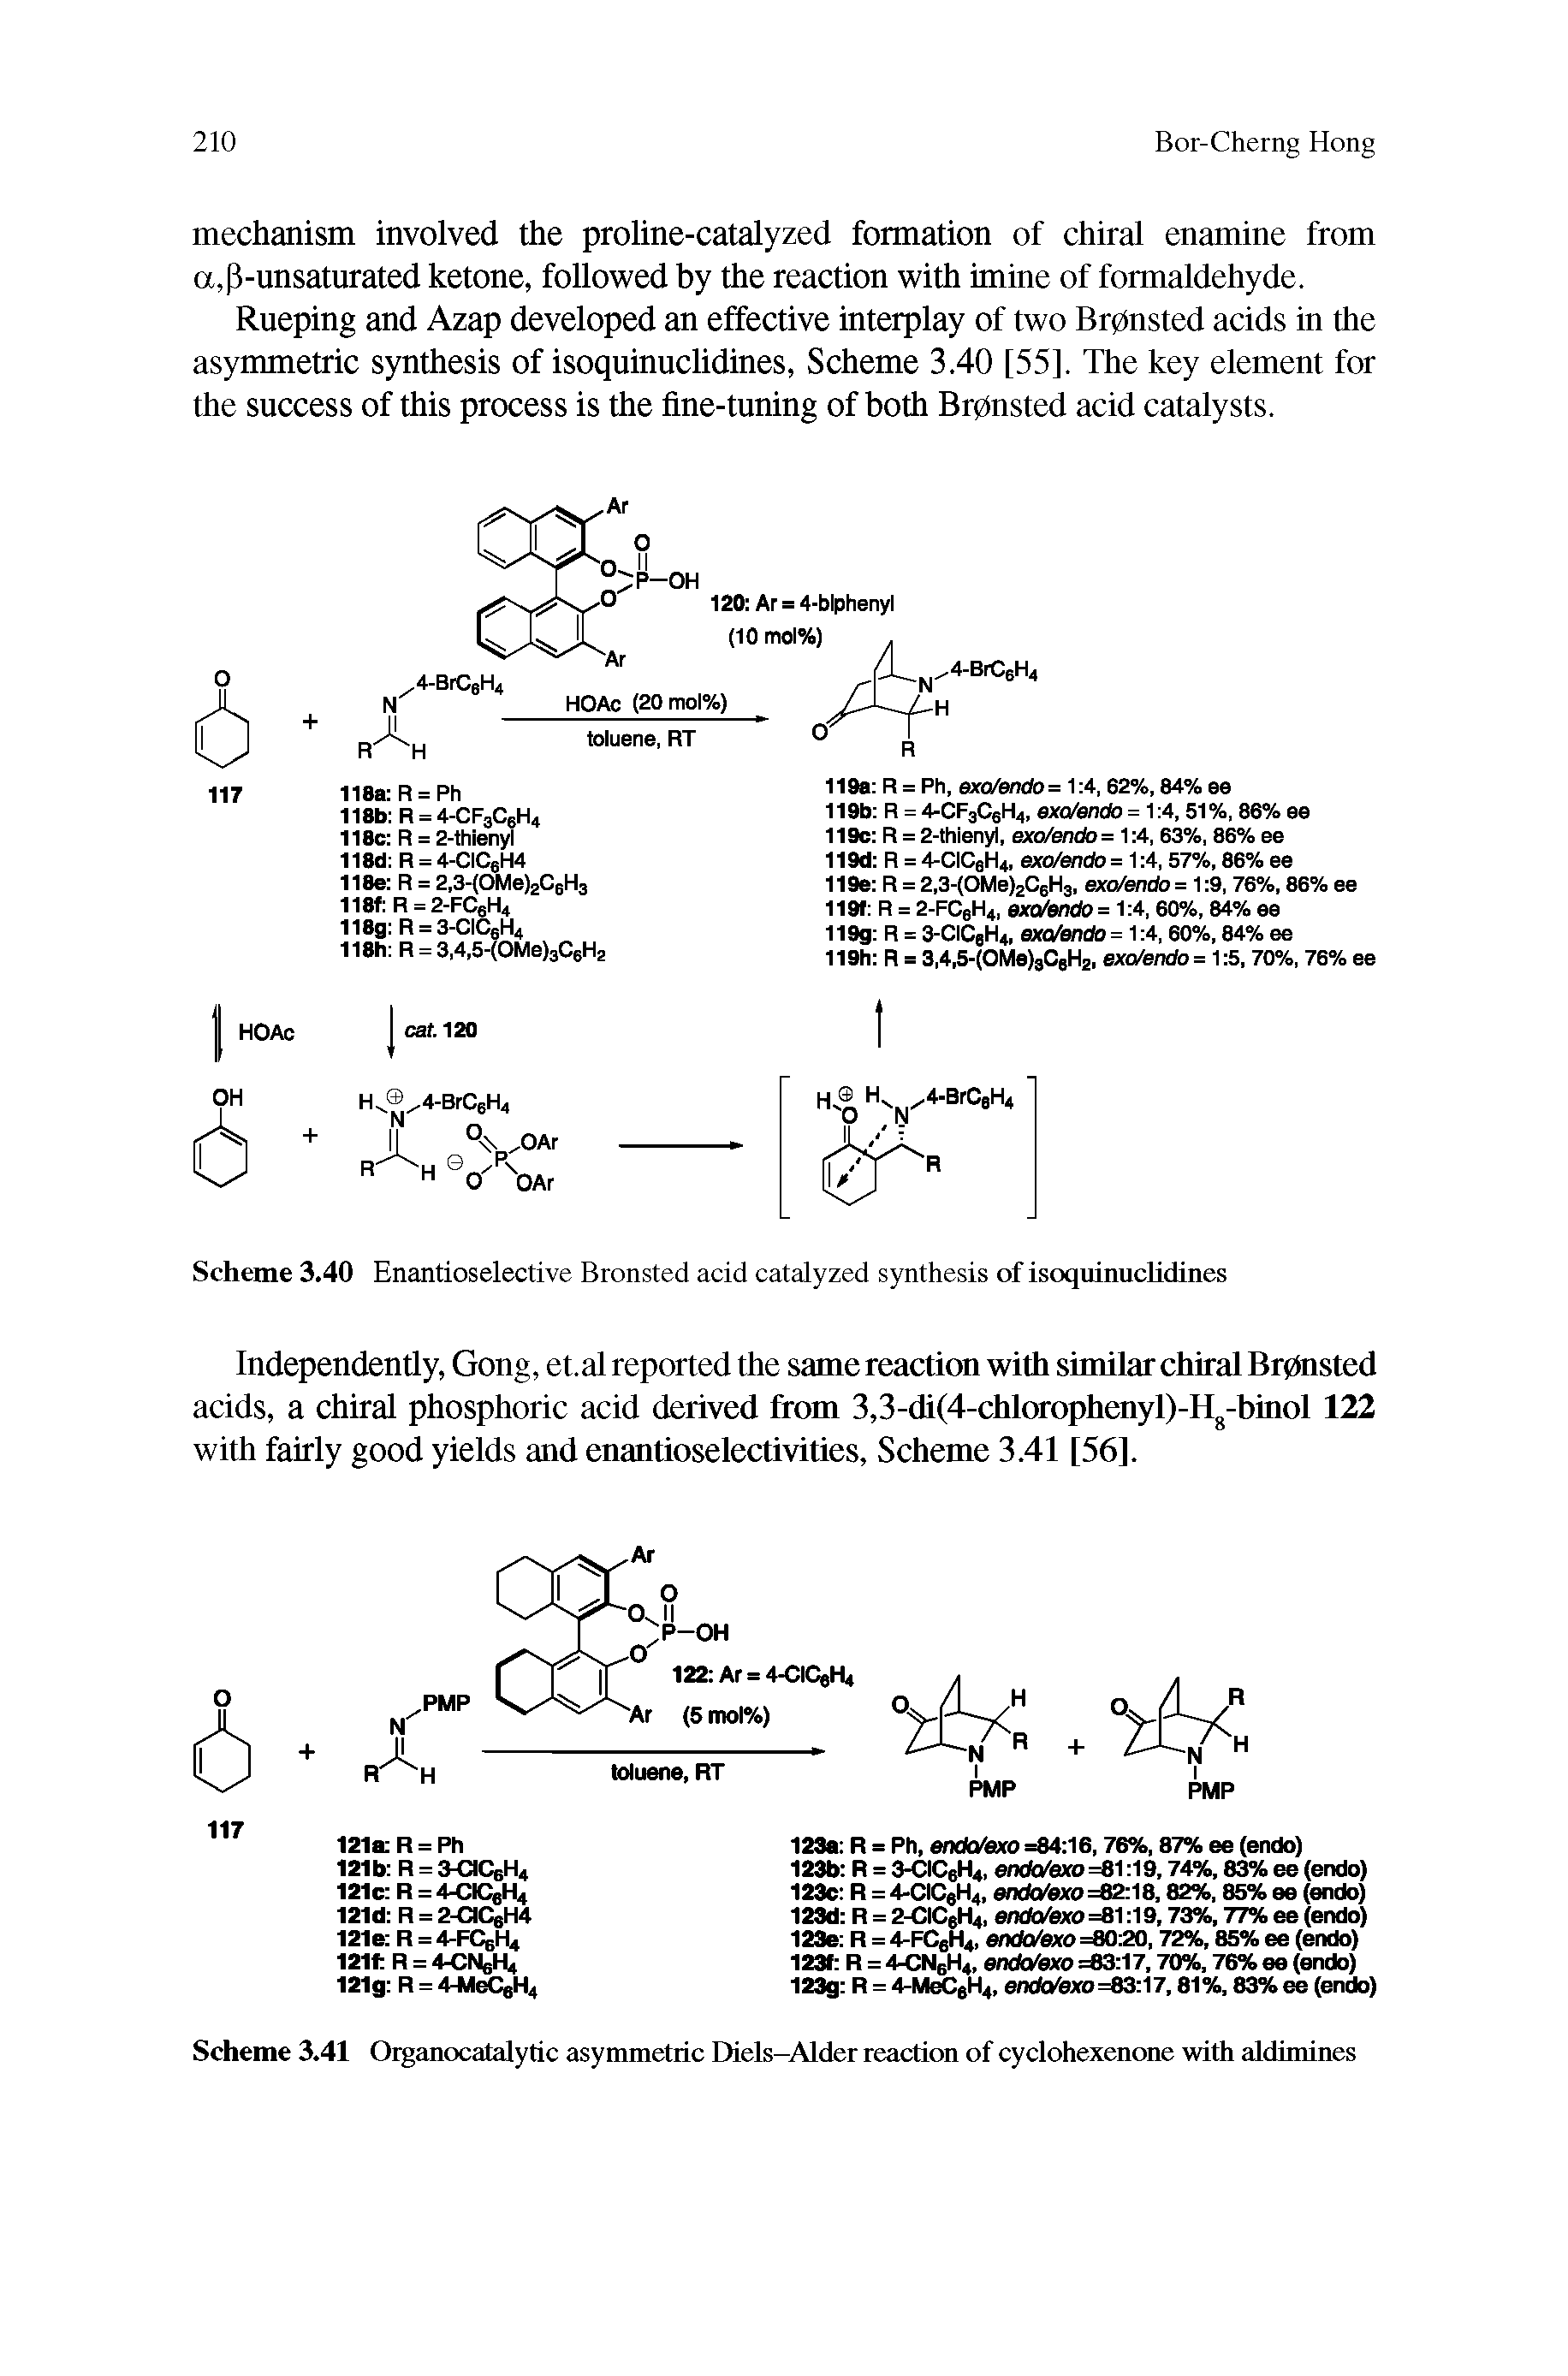 Scheme 3.40 Enantioselective Bronsted acid catalyzed synthesis of isoquinuclidines...